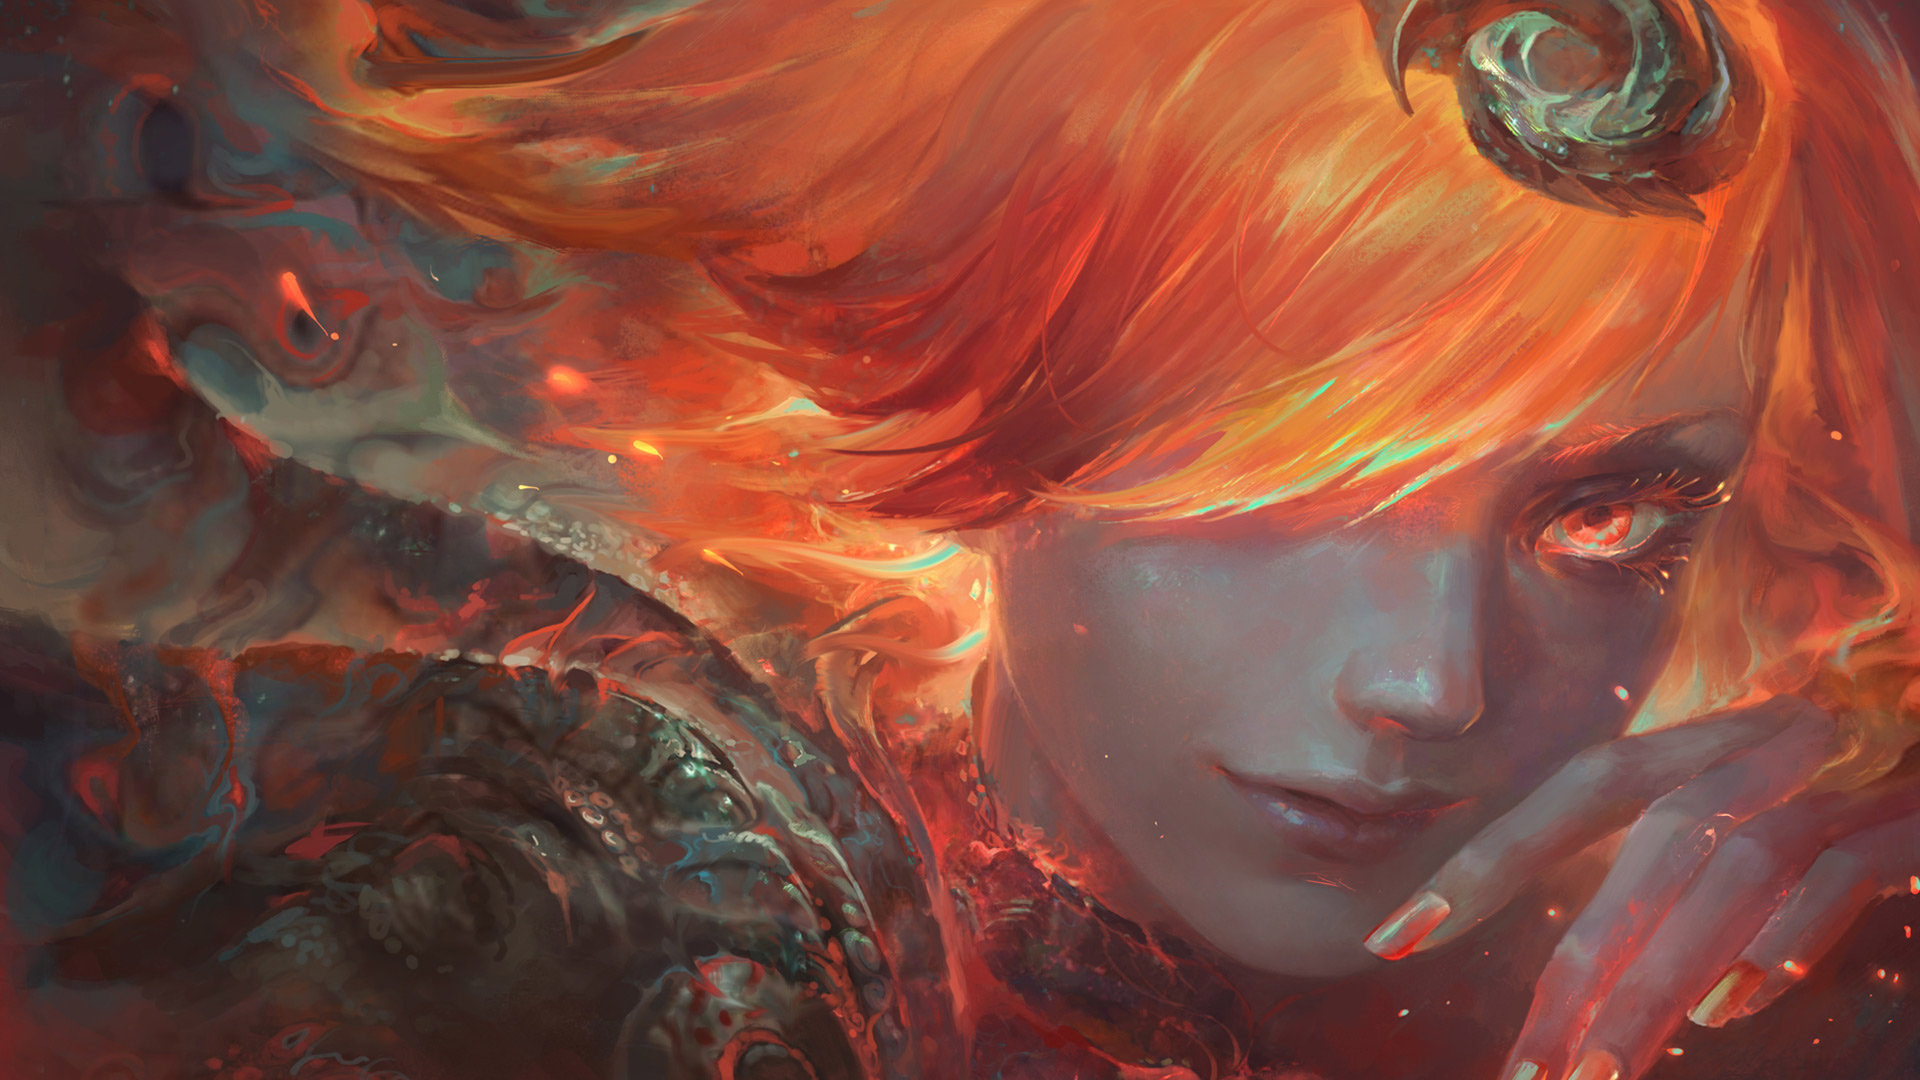 ASK RIOT: ANOTHER LUX SKIN?